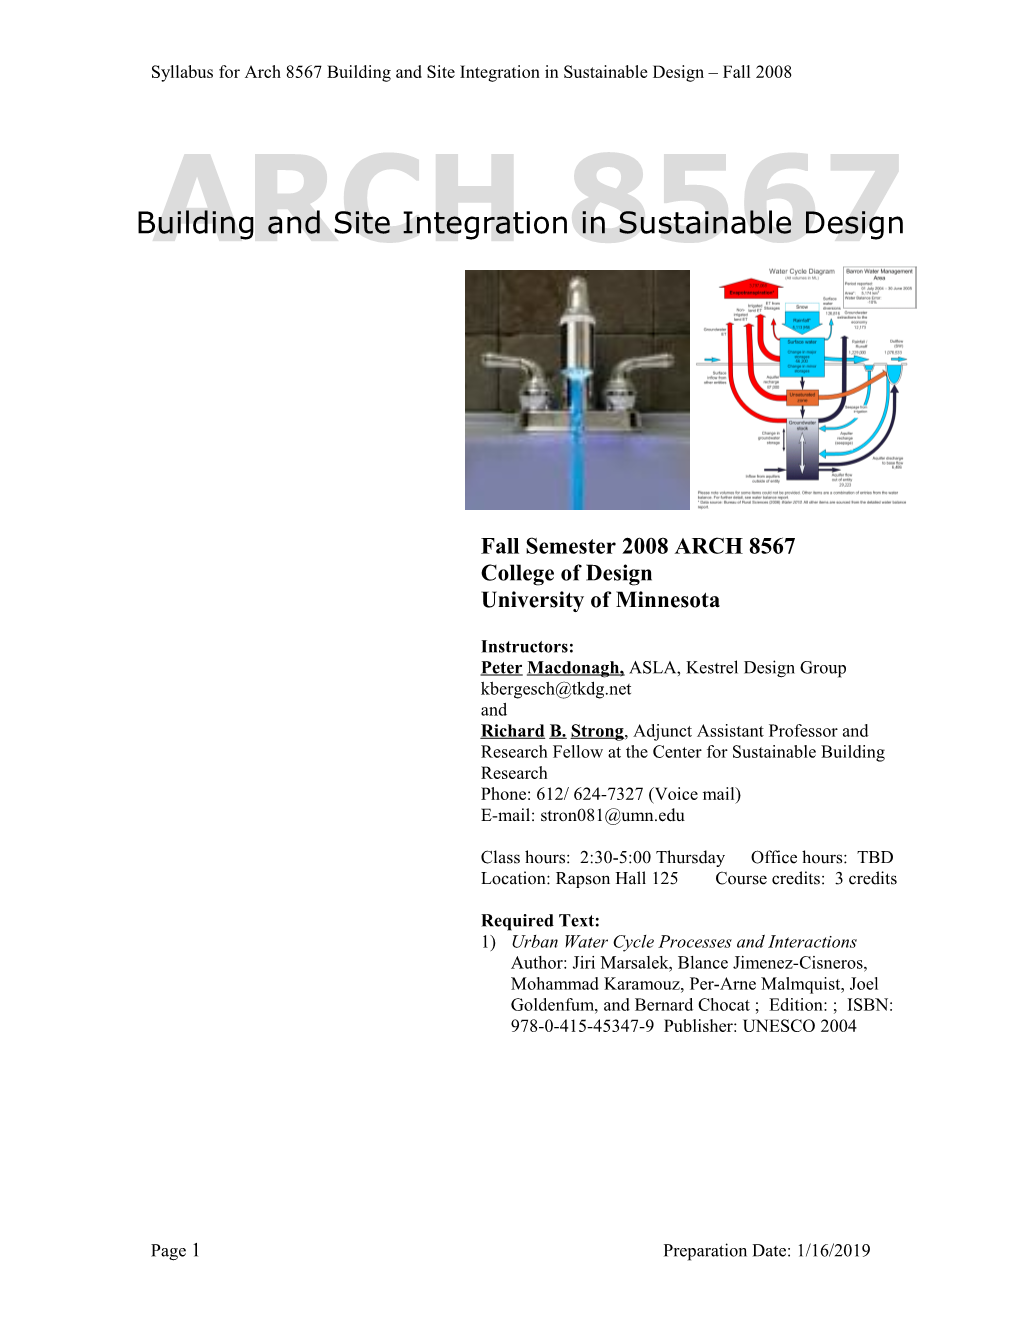 ARCH 8567 - Building and Site Integration in Sustainable Design- Fall 2007